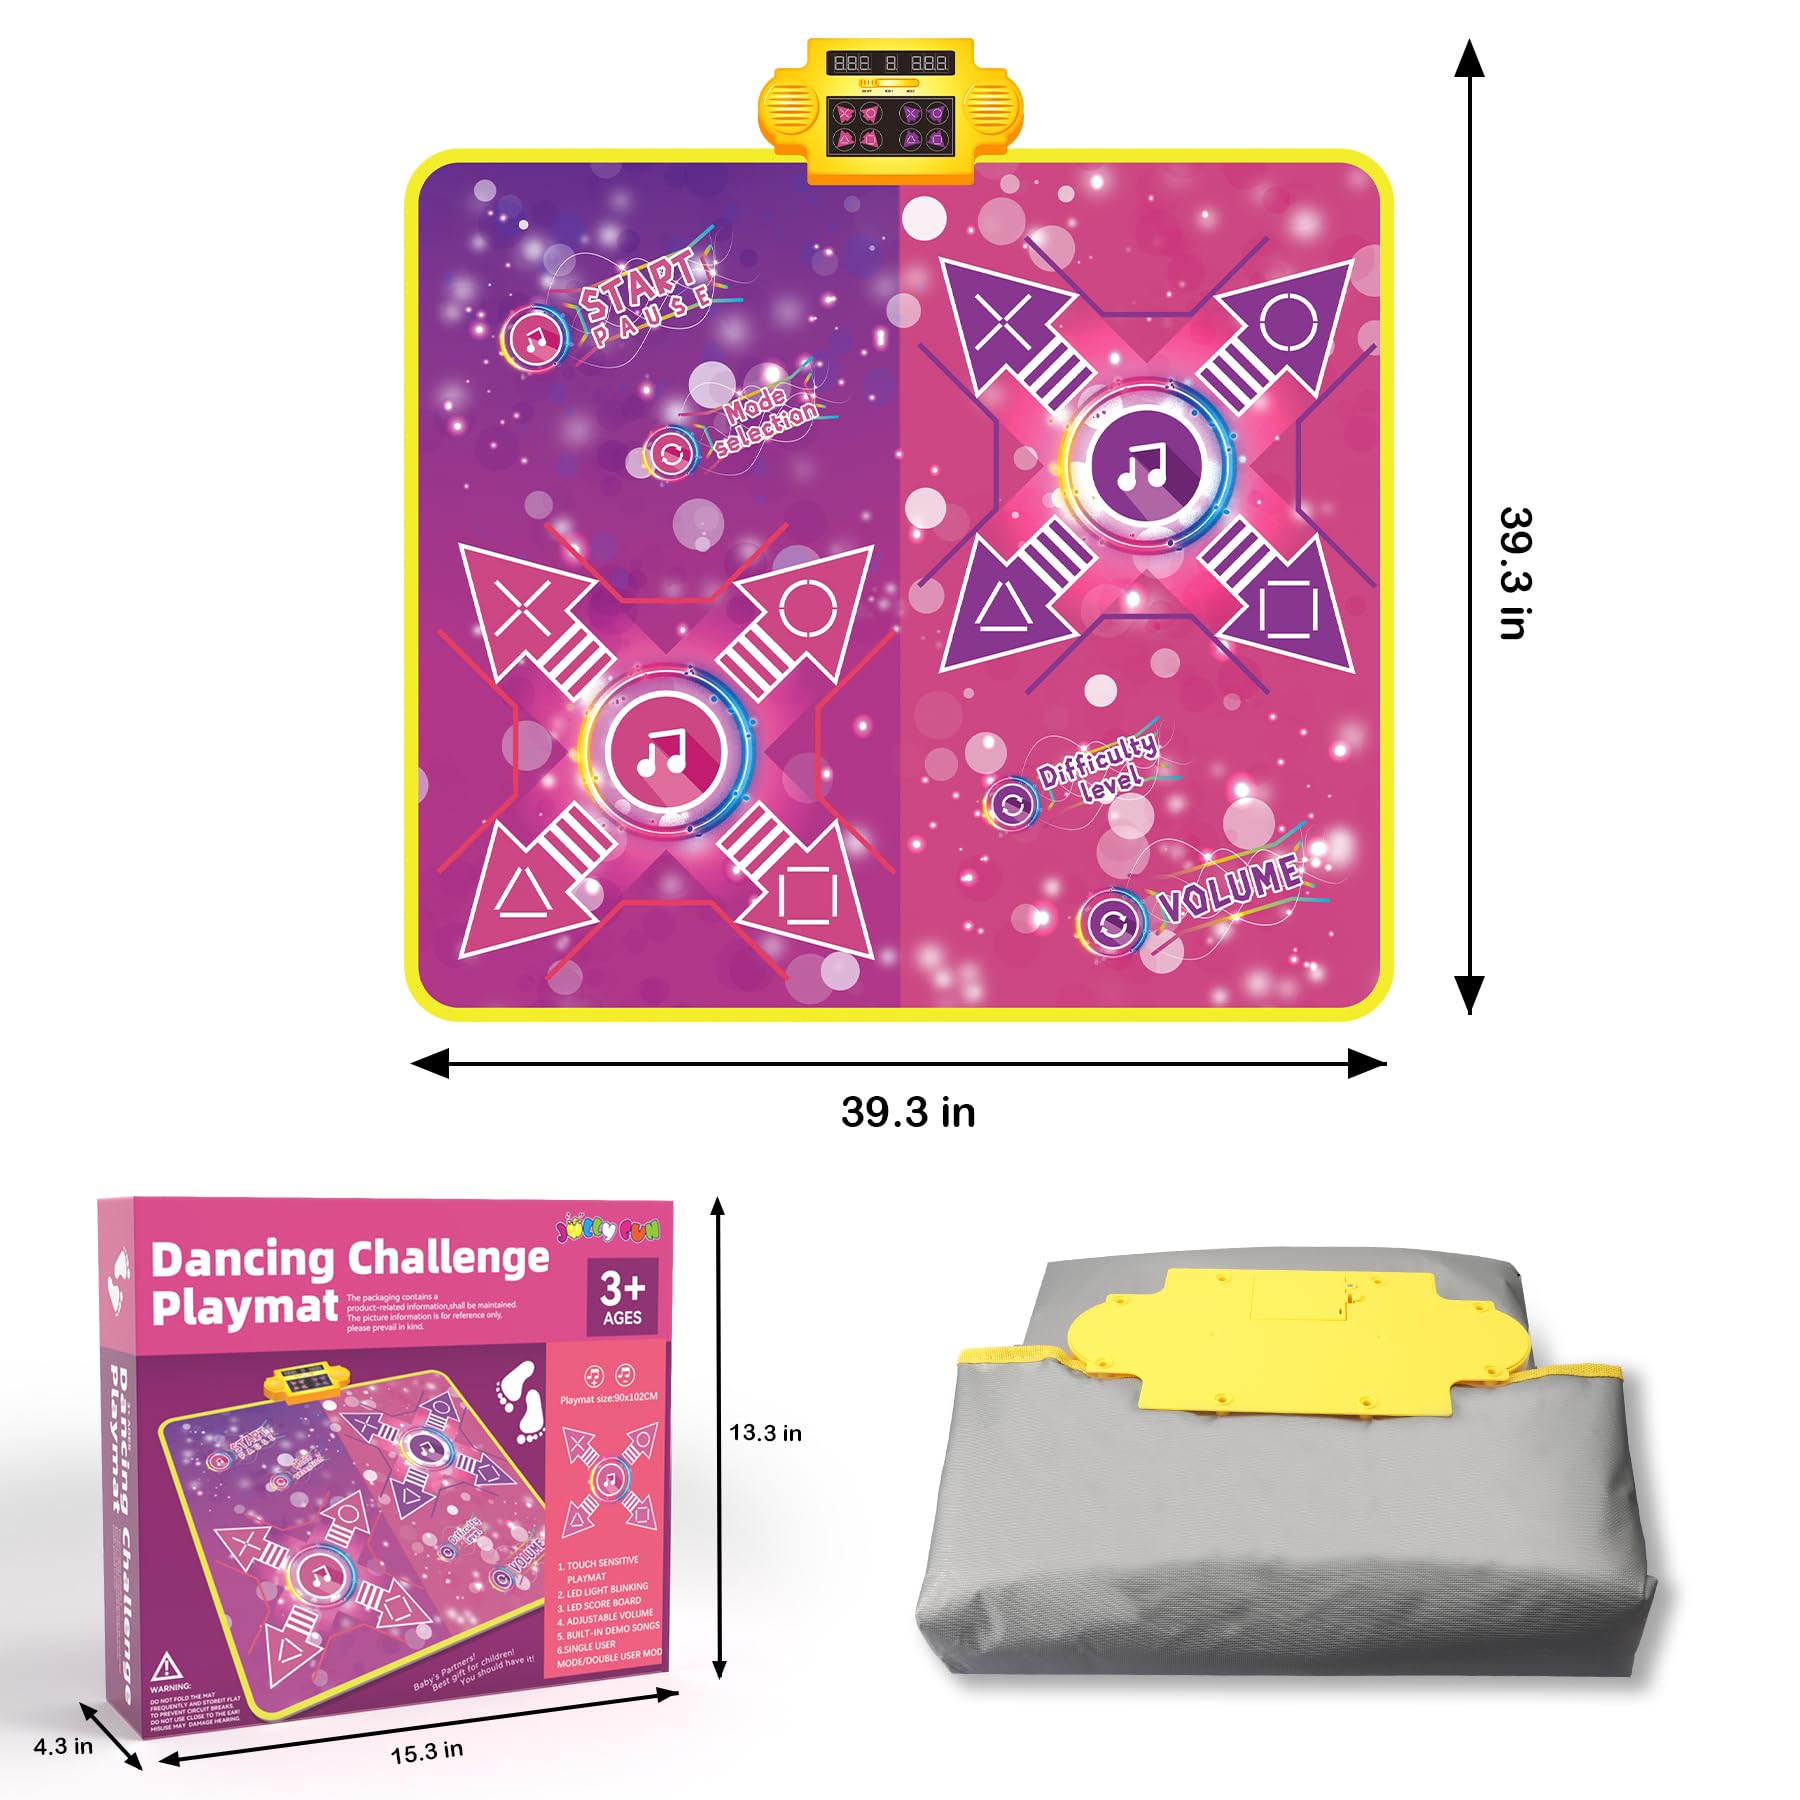 Dance Mat, Gift Toys for Girls 3 4 5 6 7 8 Years Old | Dance Mat for Kids Girls Age 4-8, Electronic Toddler Dance Pad Built-in 8 Music 8 Modes 3 PK Challenge Levels, Gifts for Children Age 3-12